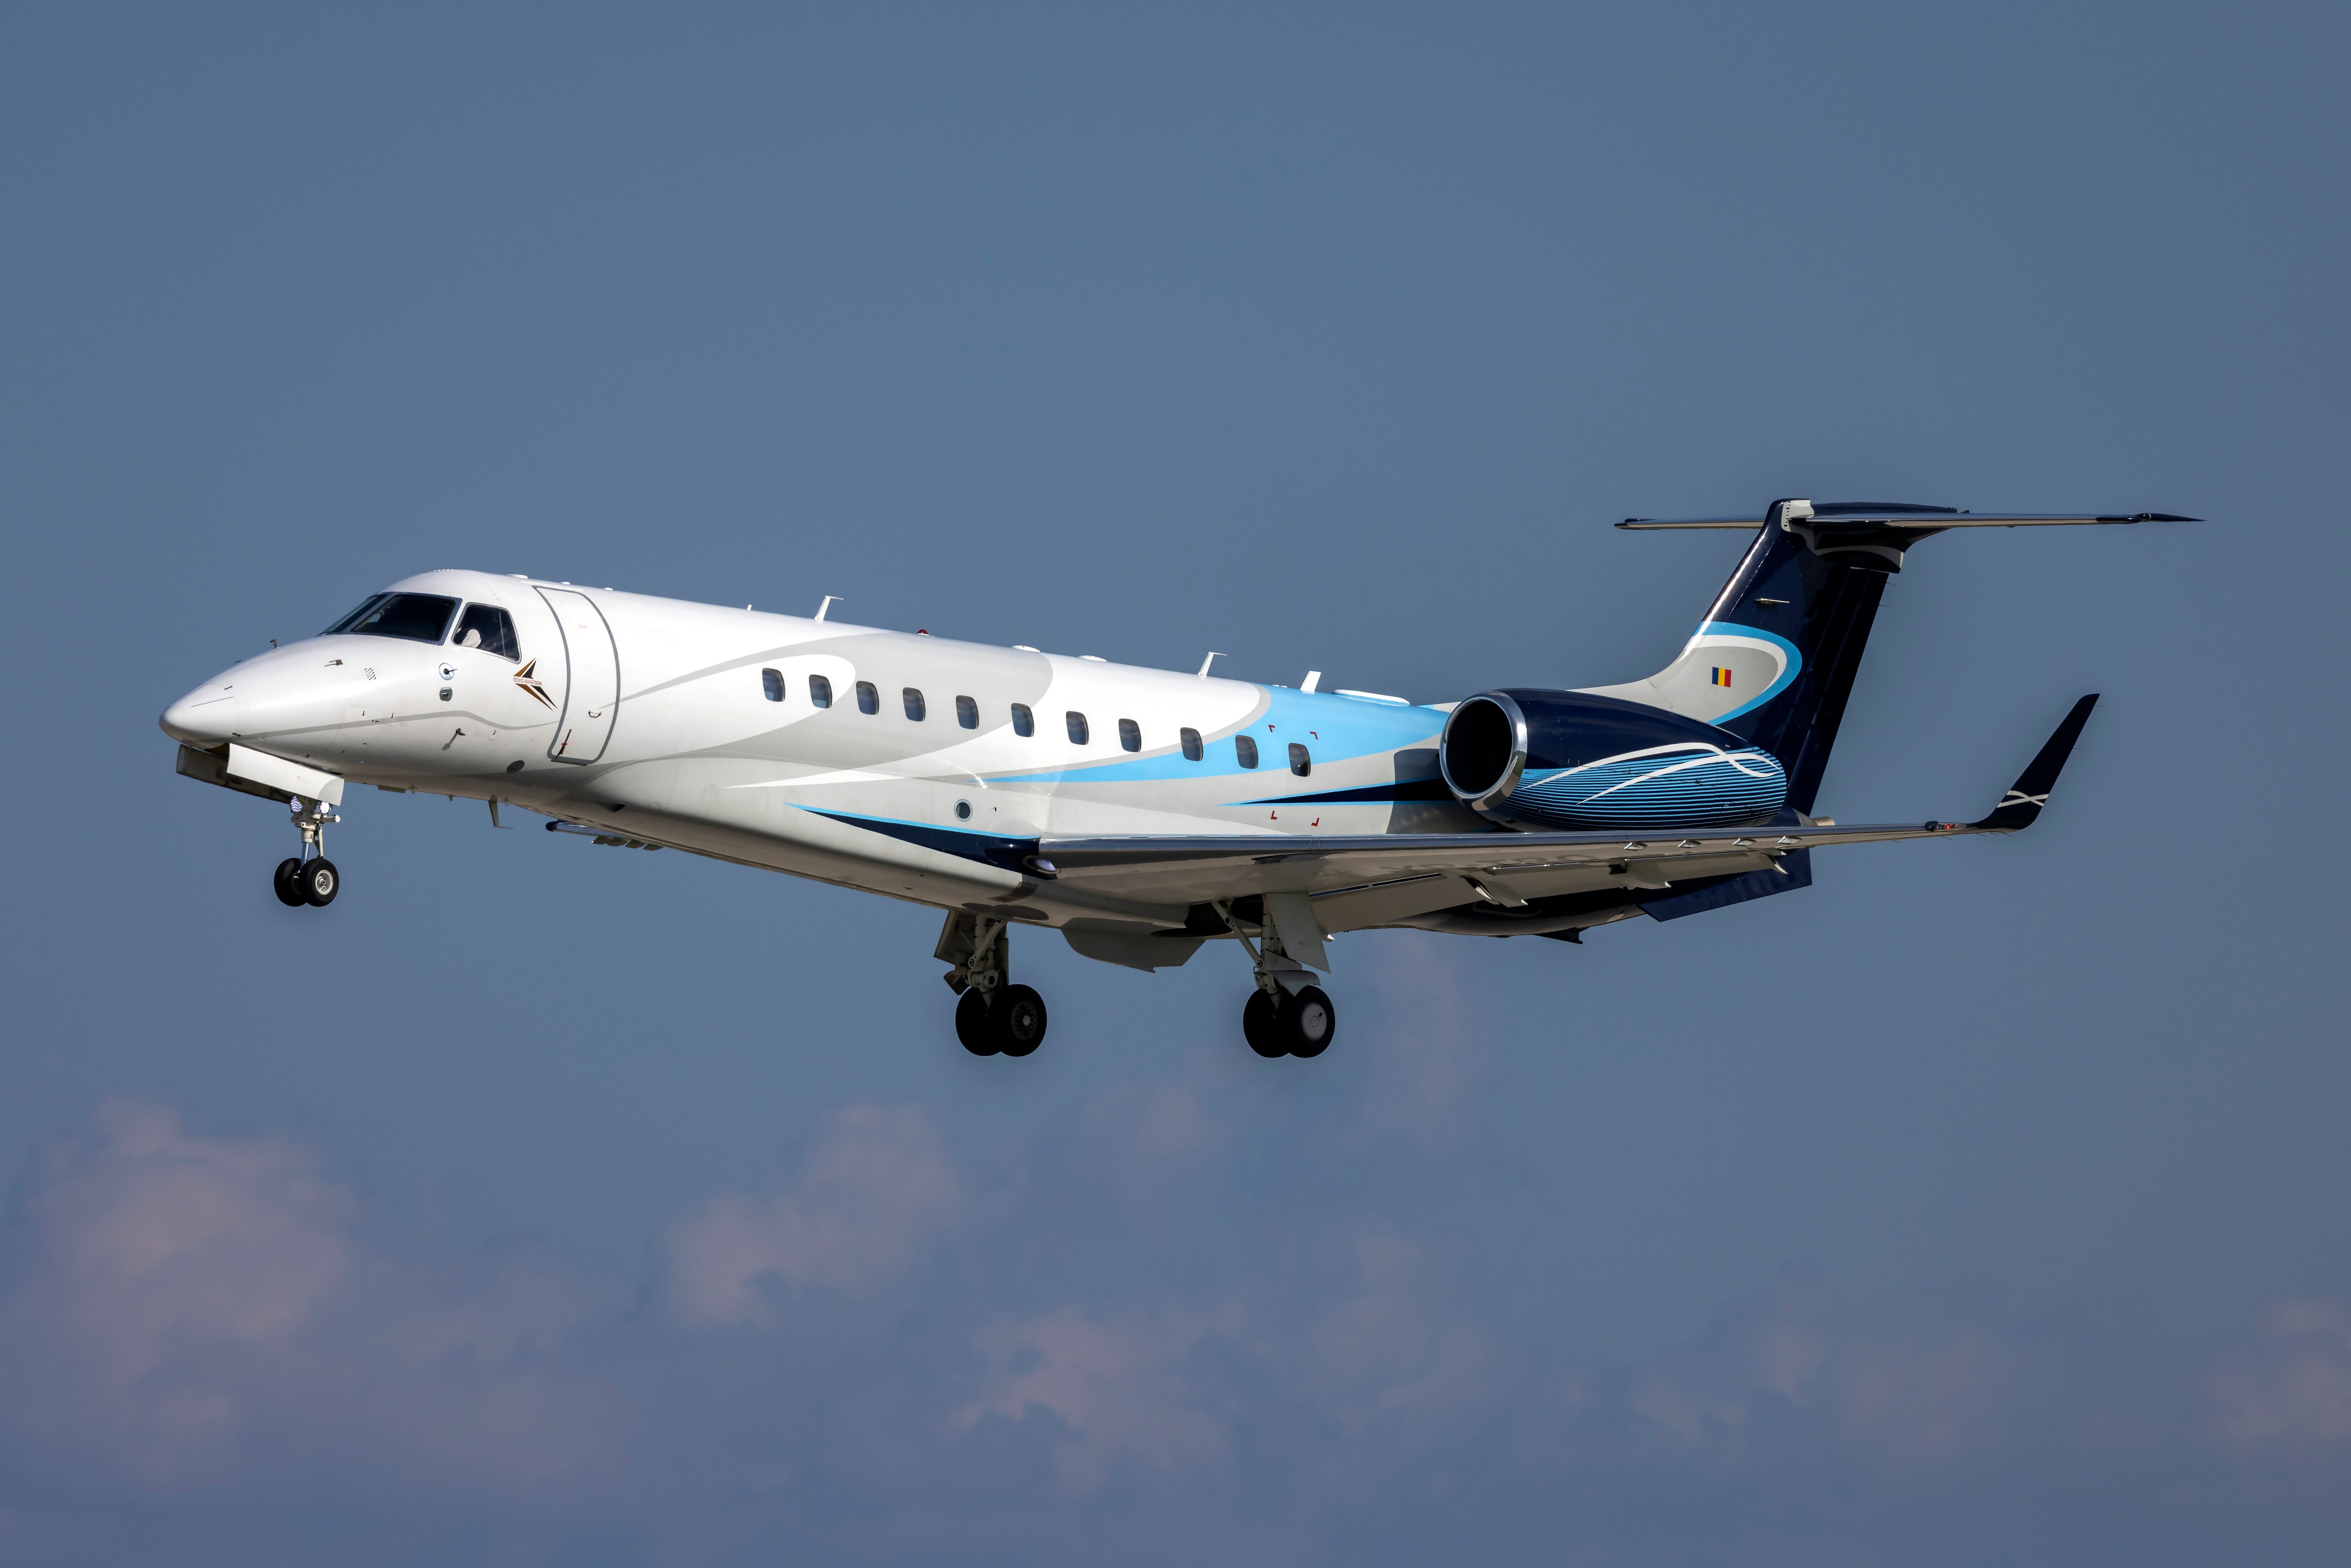 An Embraer Legacy 600 flying in the sky.